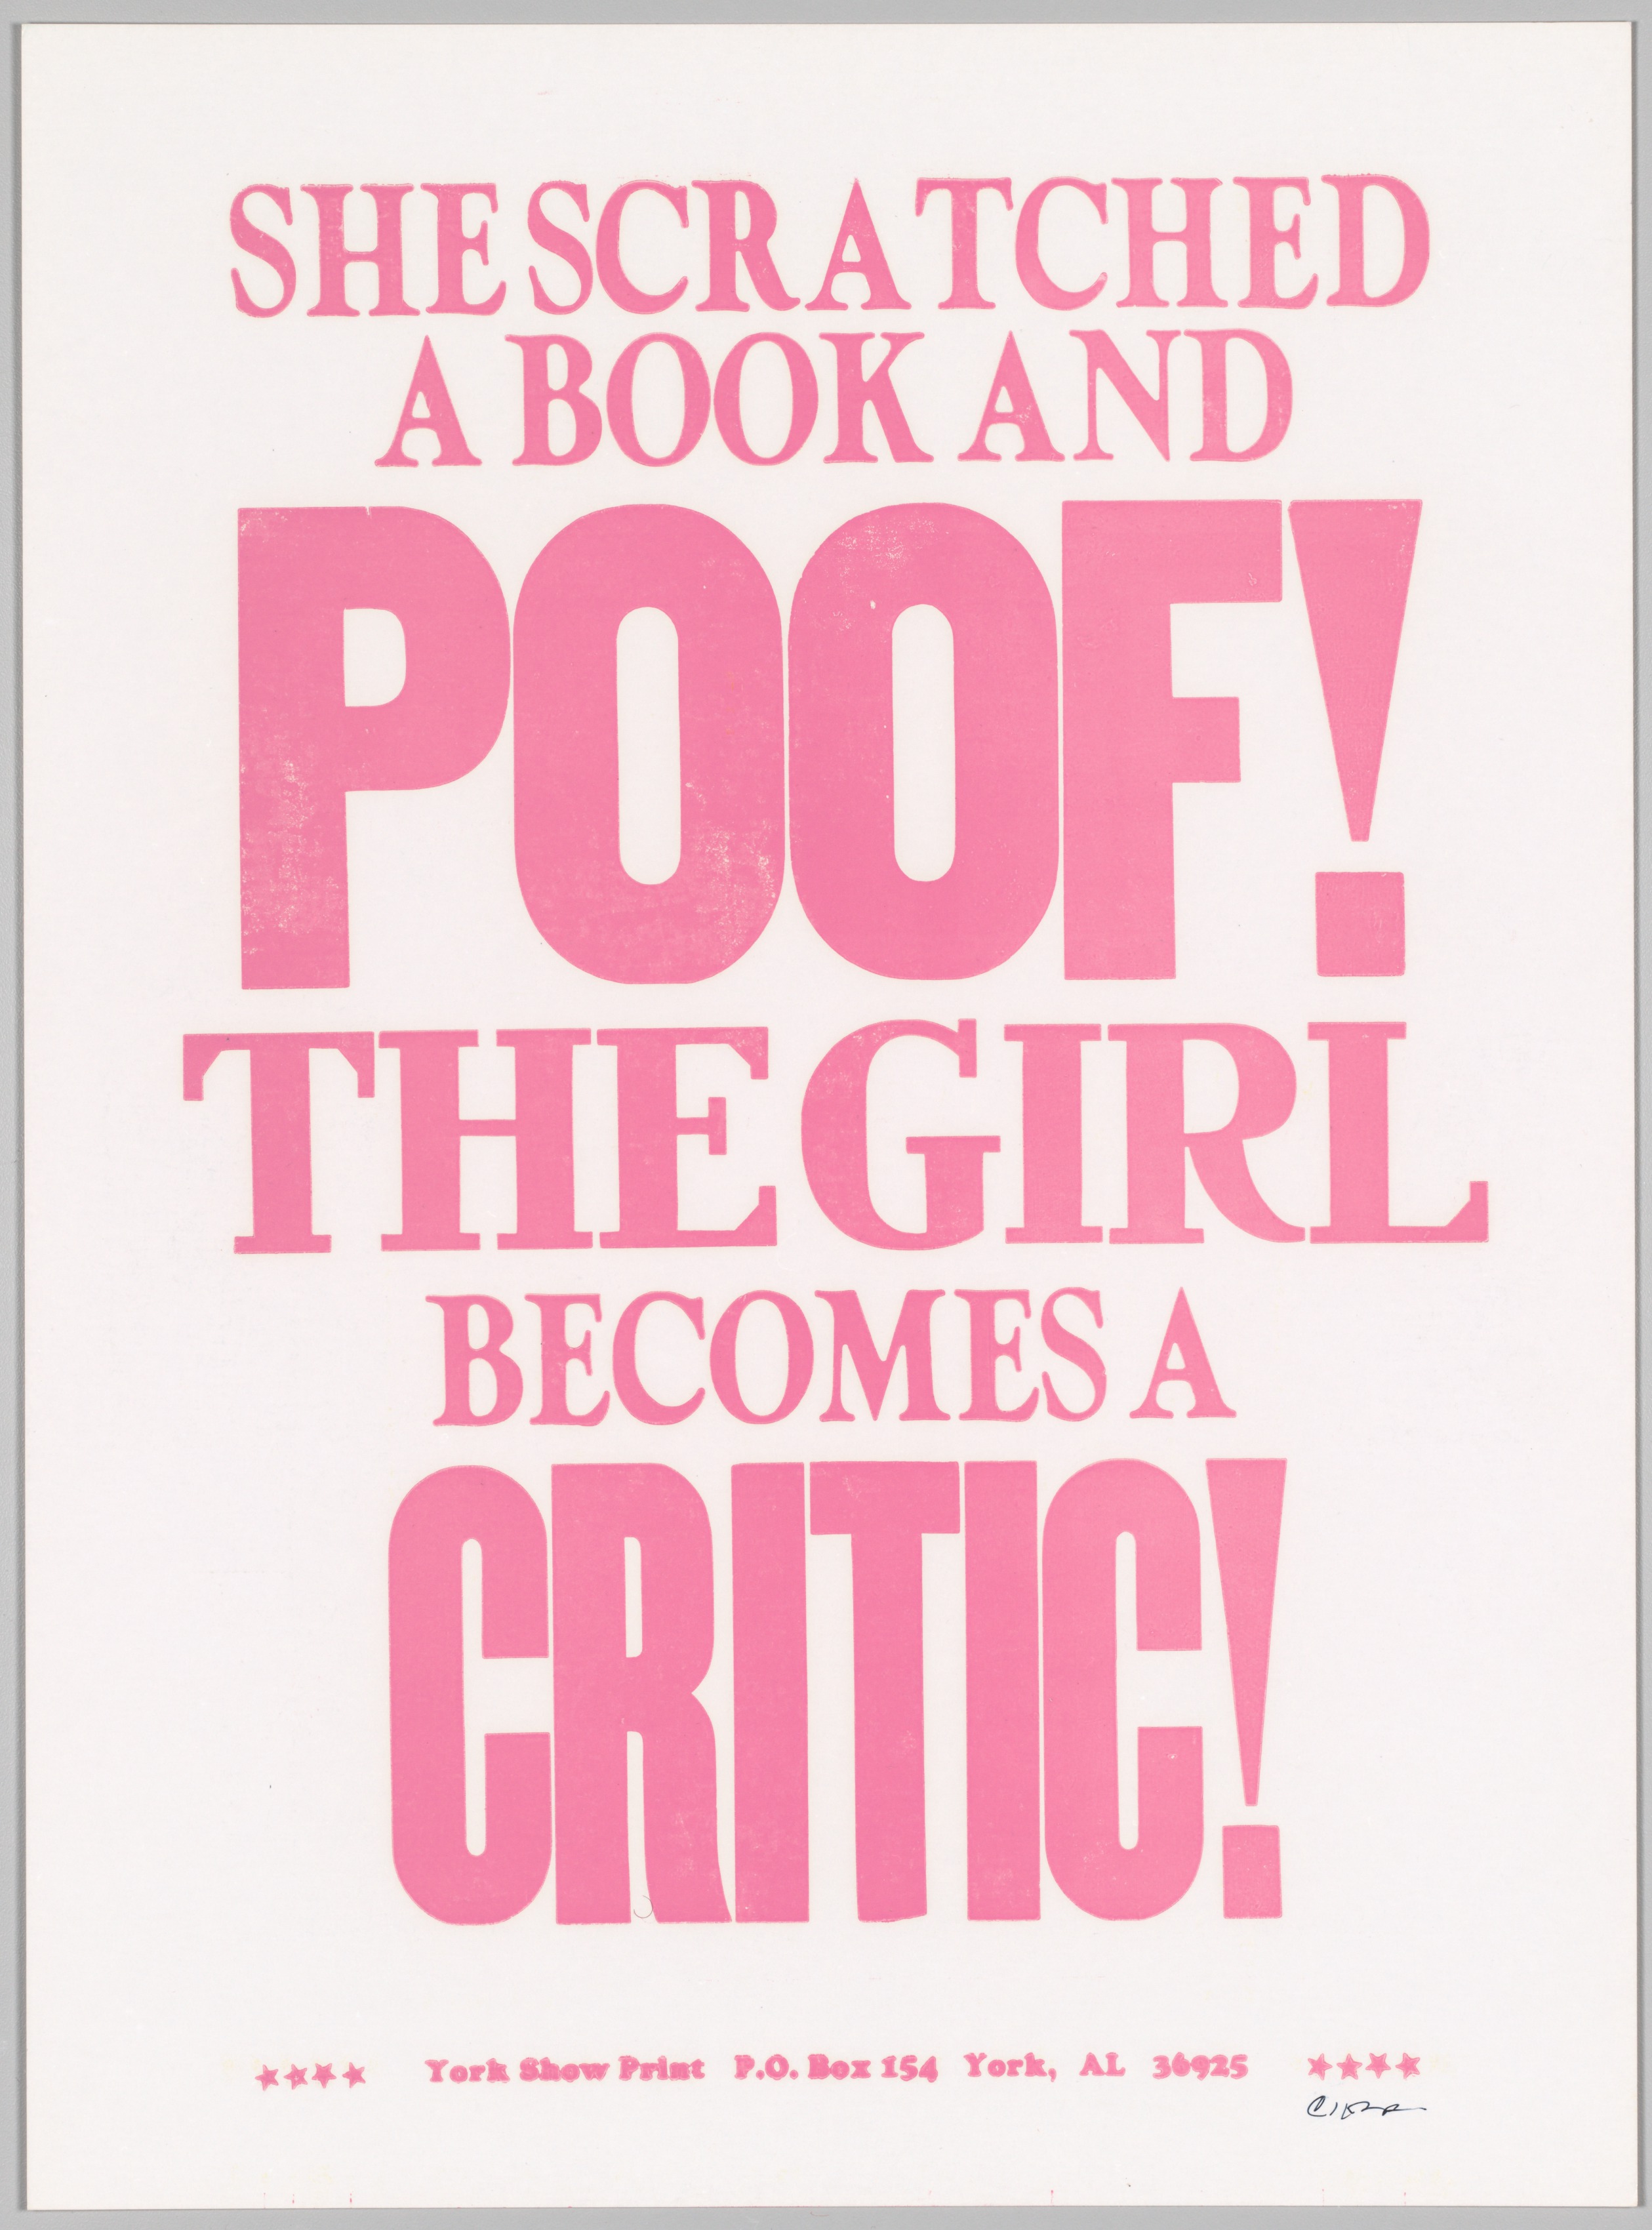 The Bad Air Smelled of Roses: She Scratched a Book and POOF! The Girl Becomes a Critic!